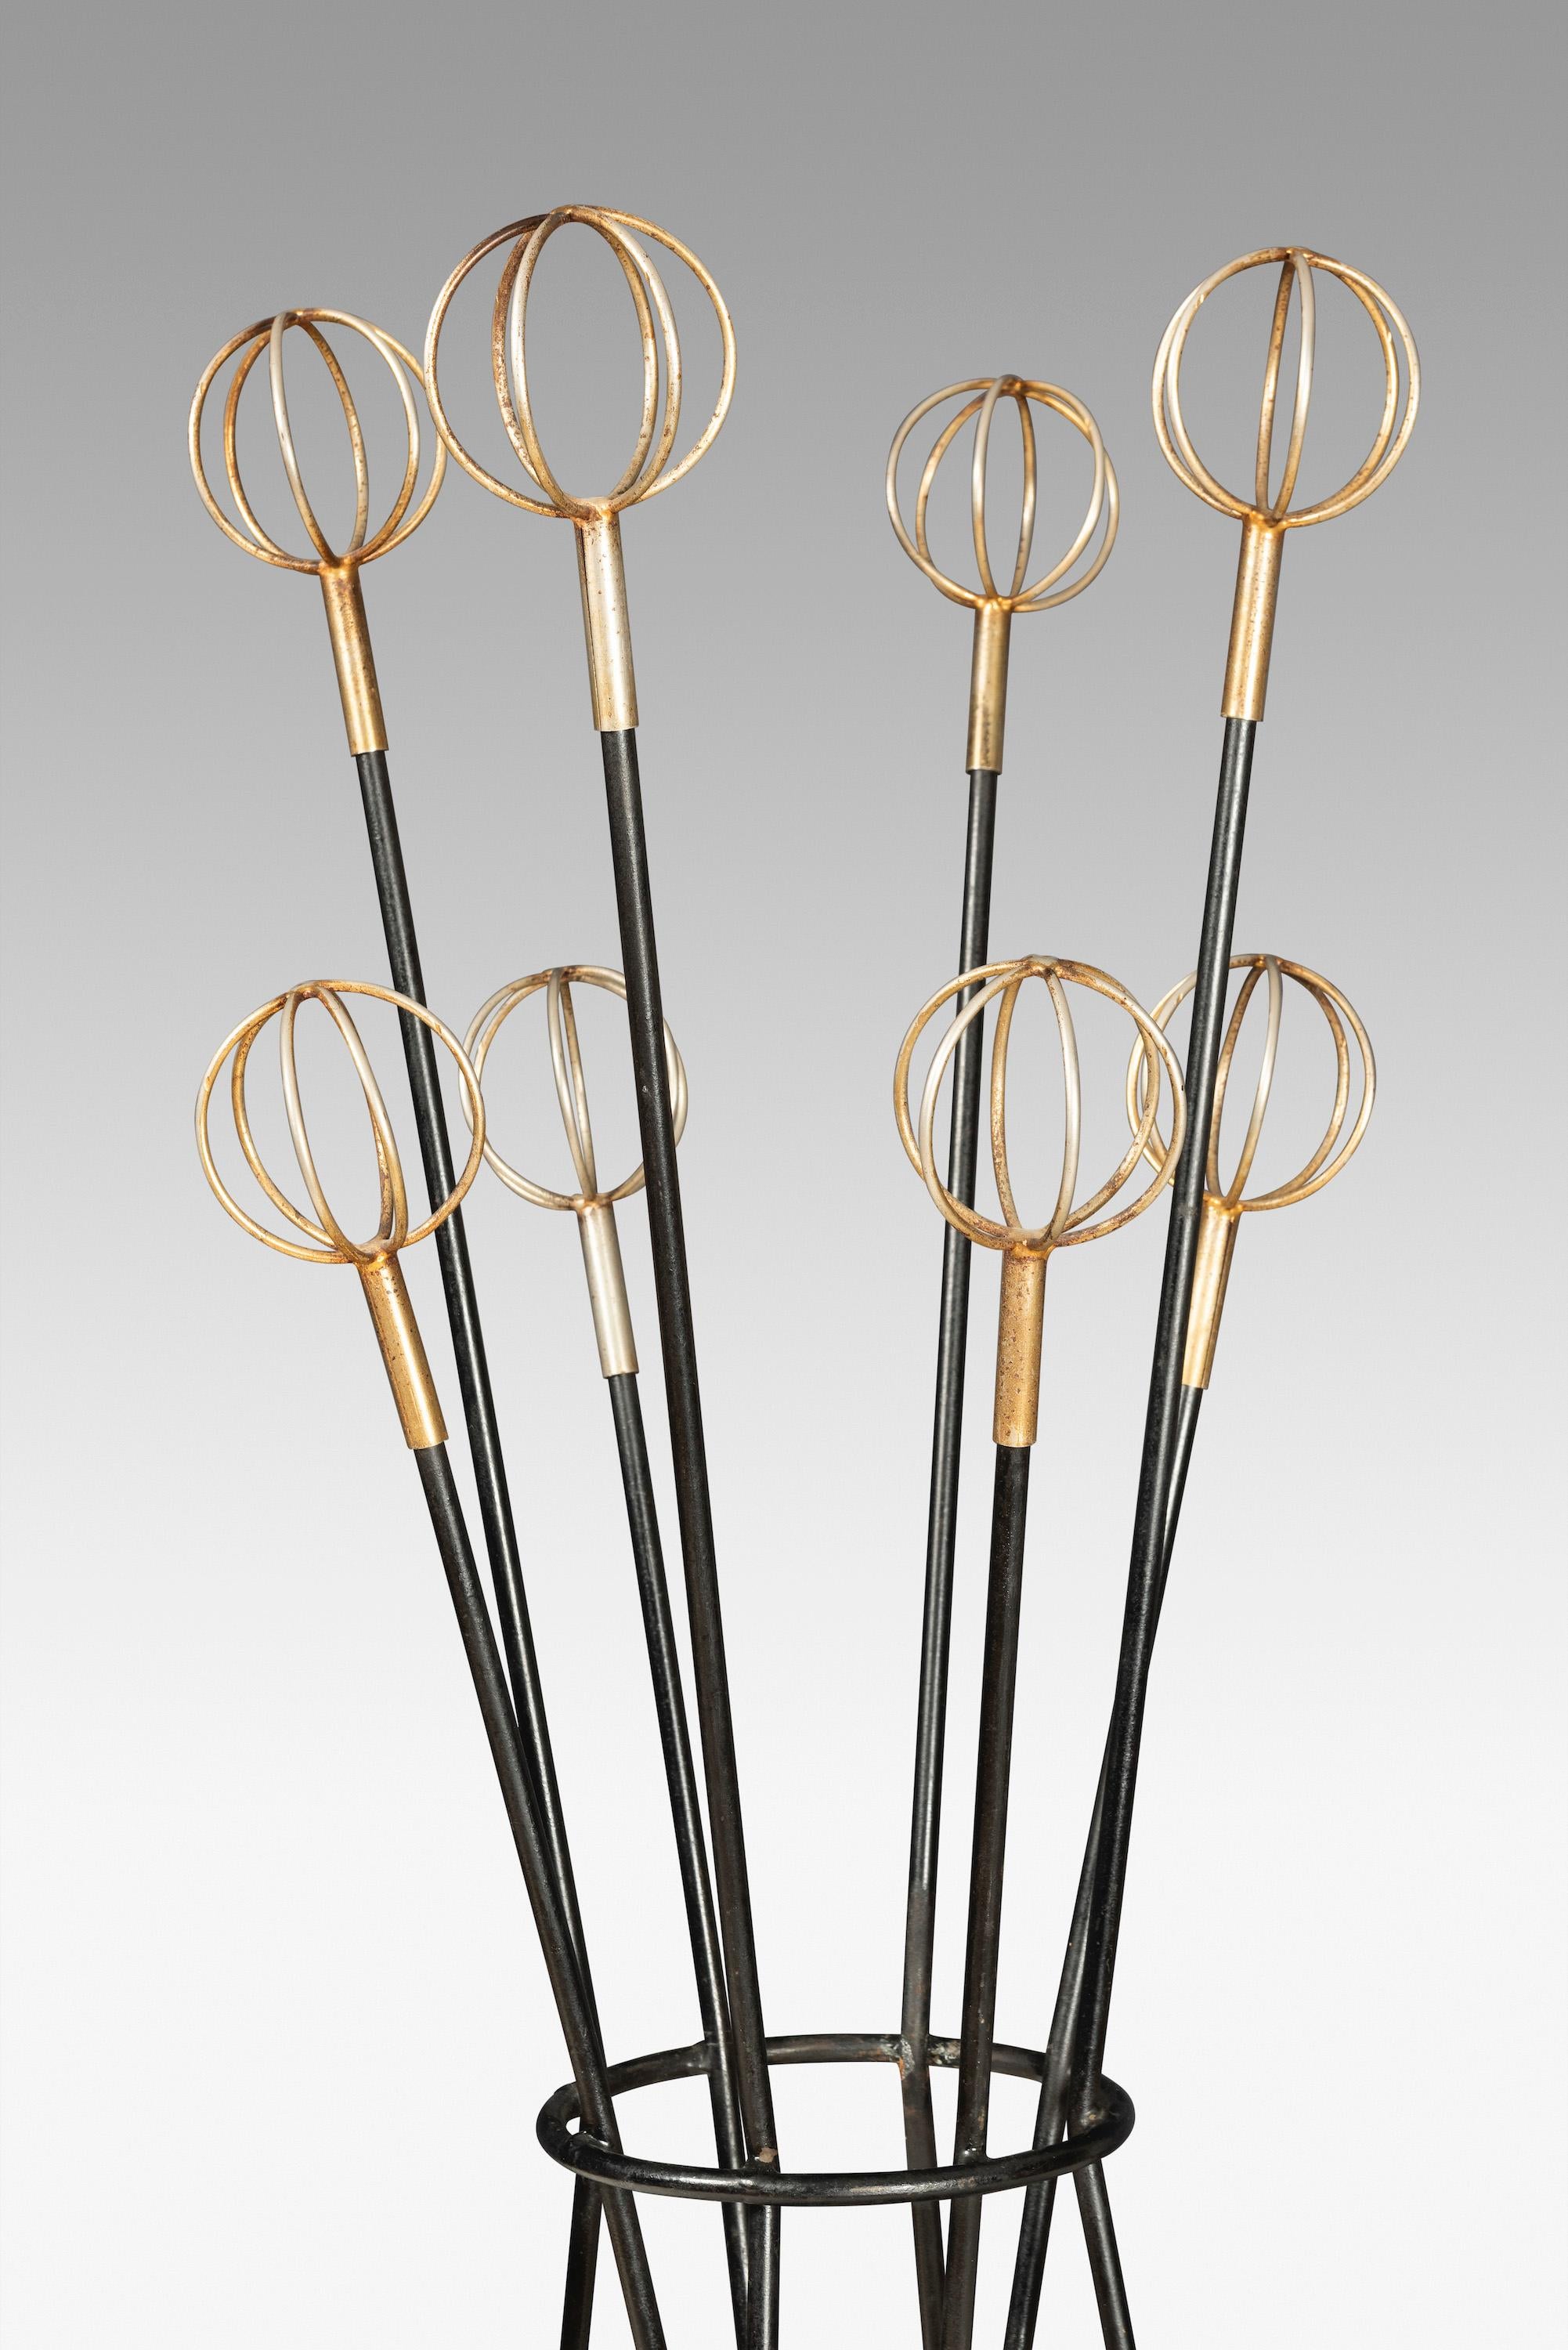 Mid-Century French coat rack designed by Roger Feraud. Manufactured by Geo France. The spheres are nickel plated brass. The natural patina of the spheres has been kept.
Spheres are 9cm.